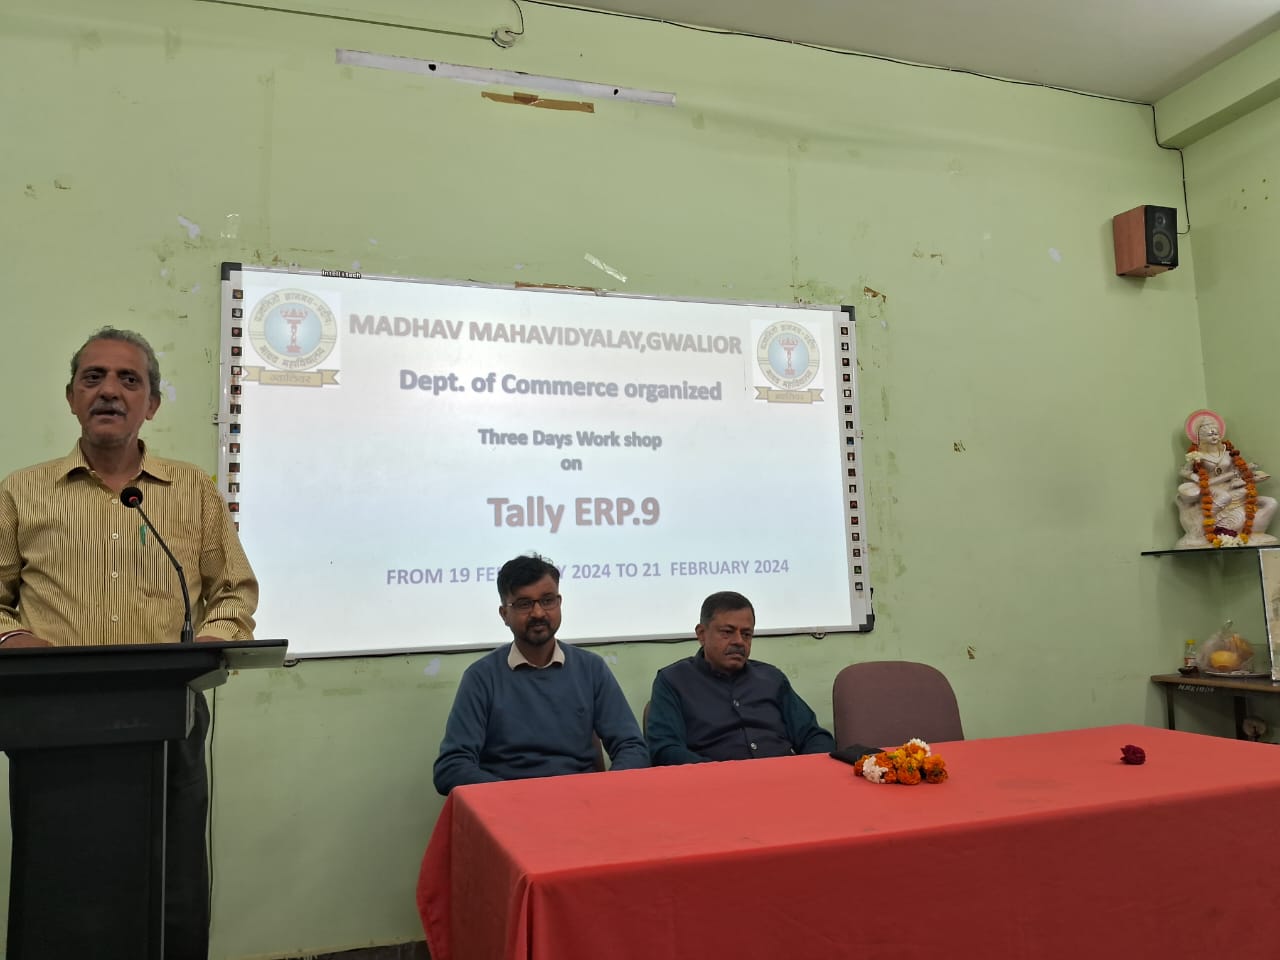 COMMERCE DEPARTMENT ORGANIZED 3 DAYS WORK SHOP ON TALLY ERP.9 FROM 19 -21 FEBRUARY 2024